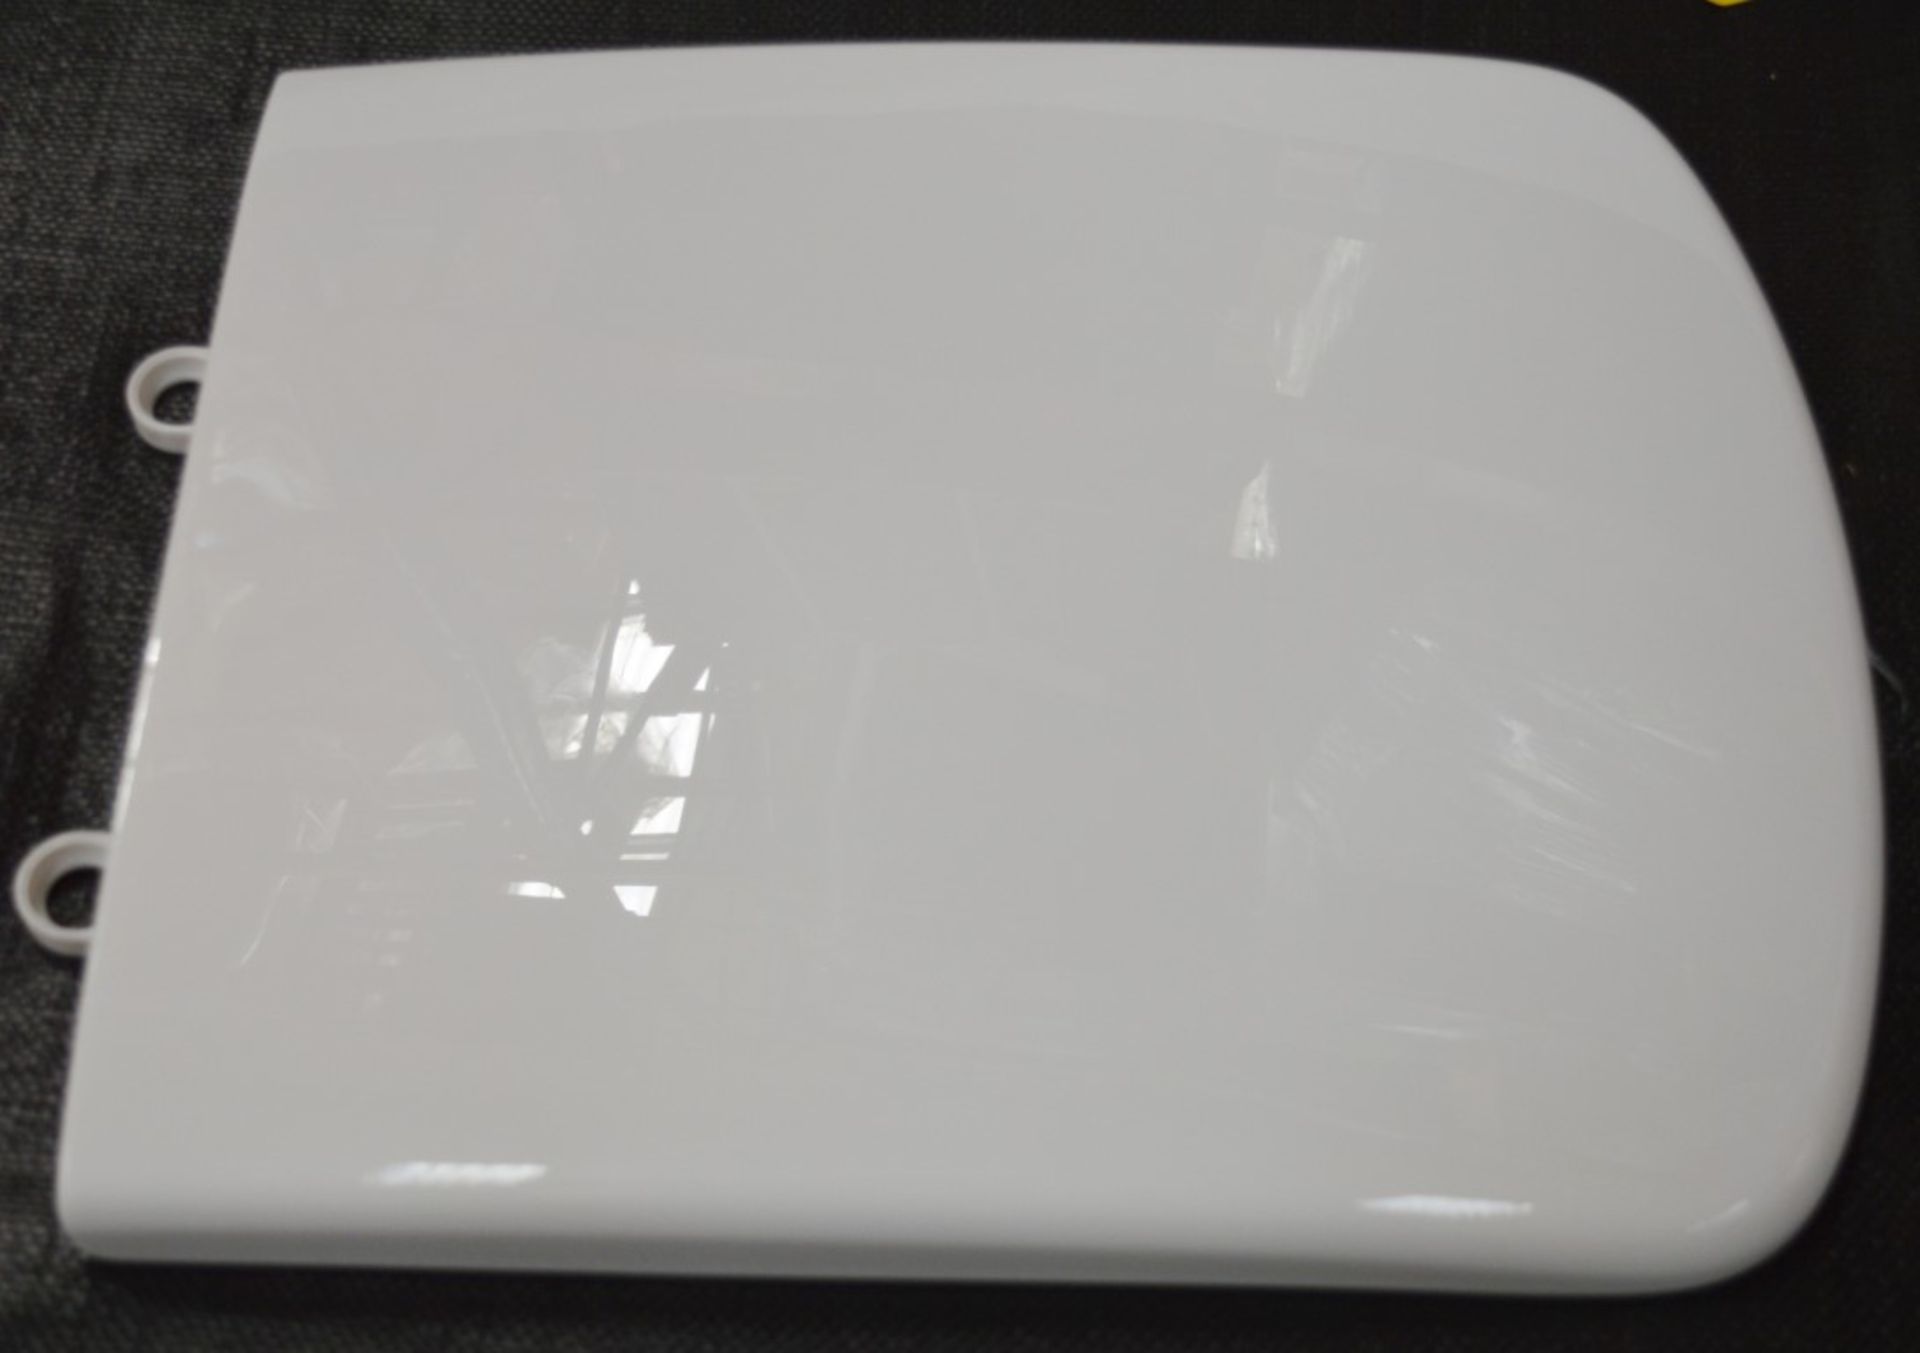 10 x Vogue Chevron Modern Square White Soft Close Toilet Seats and Cover Top Fixing - Brand New - Image 4 of 4